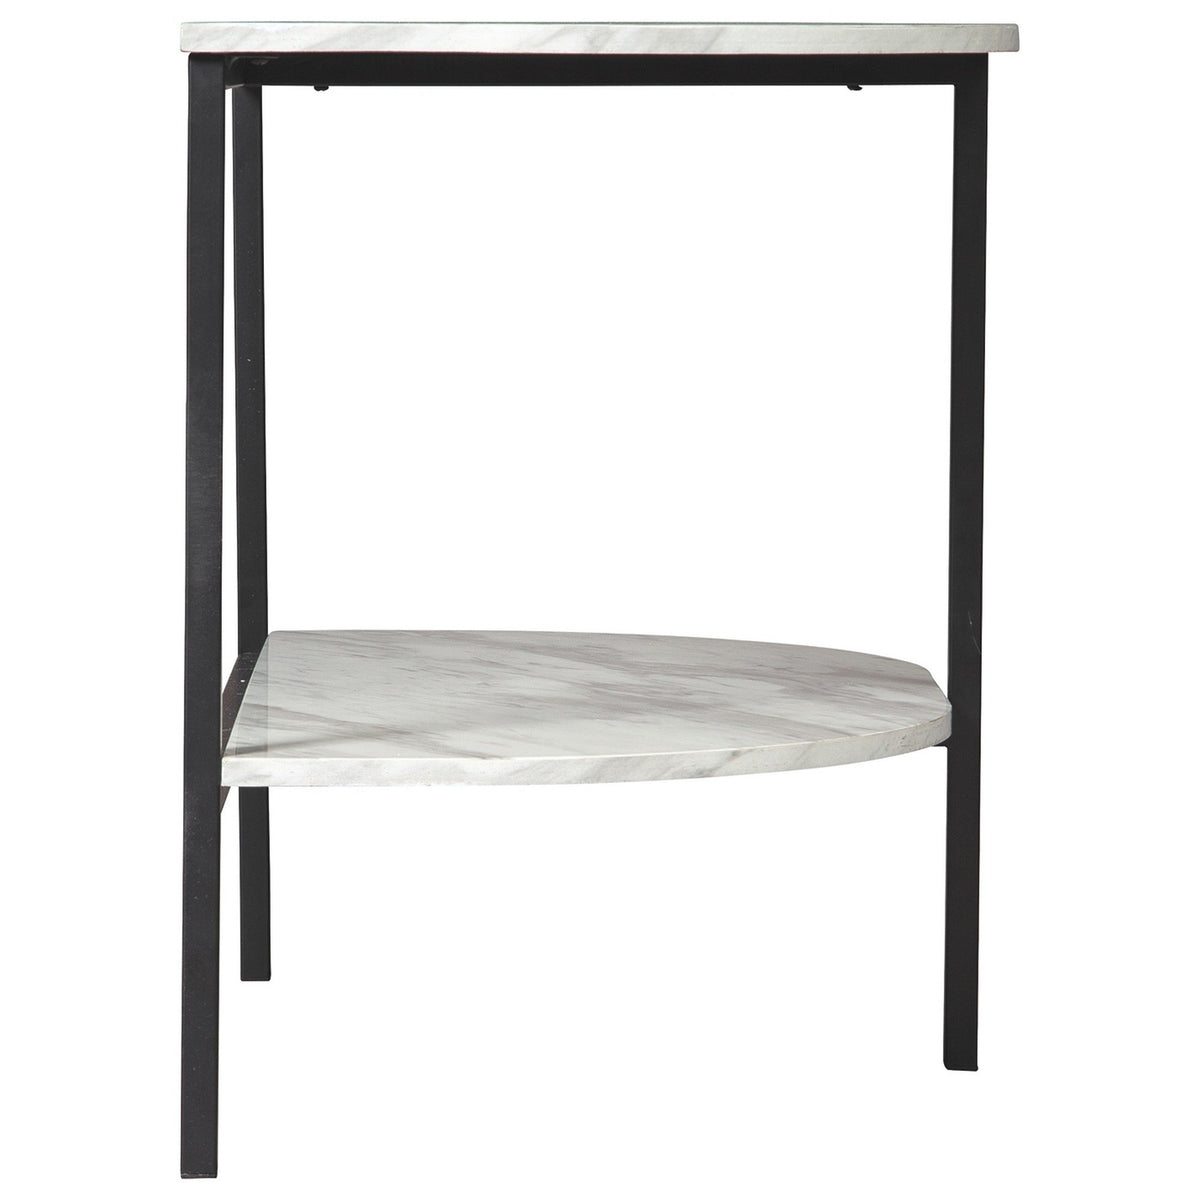 Crescent Moon Shaped Marble Top Metal Chair Side End Table, White and Black - BM226511